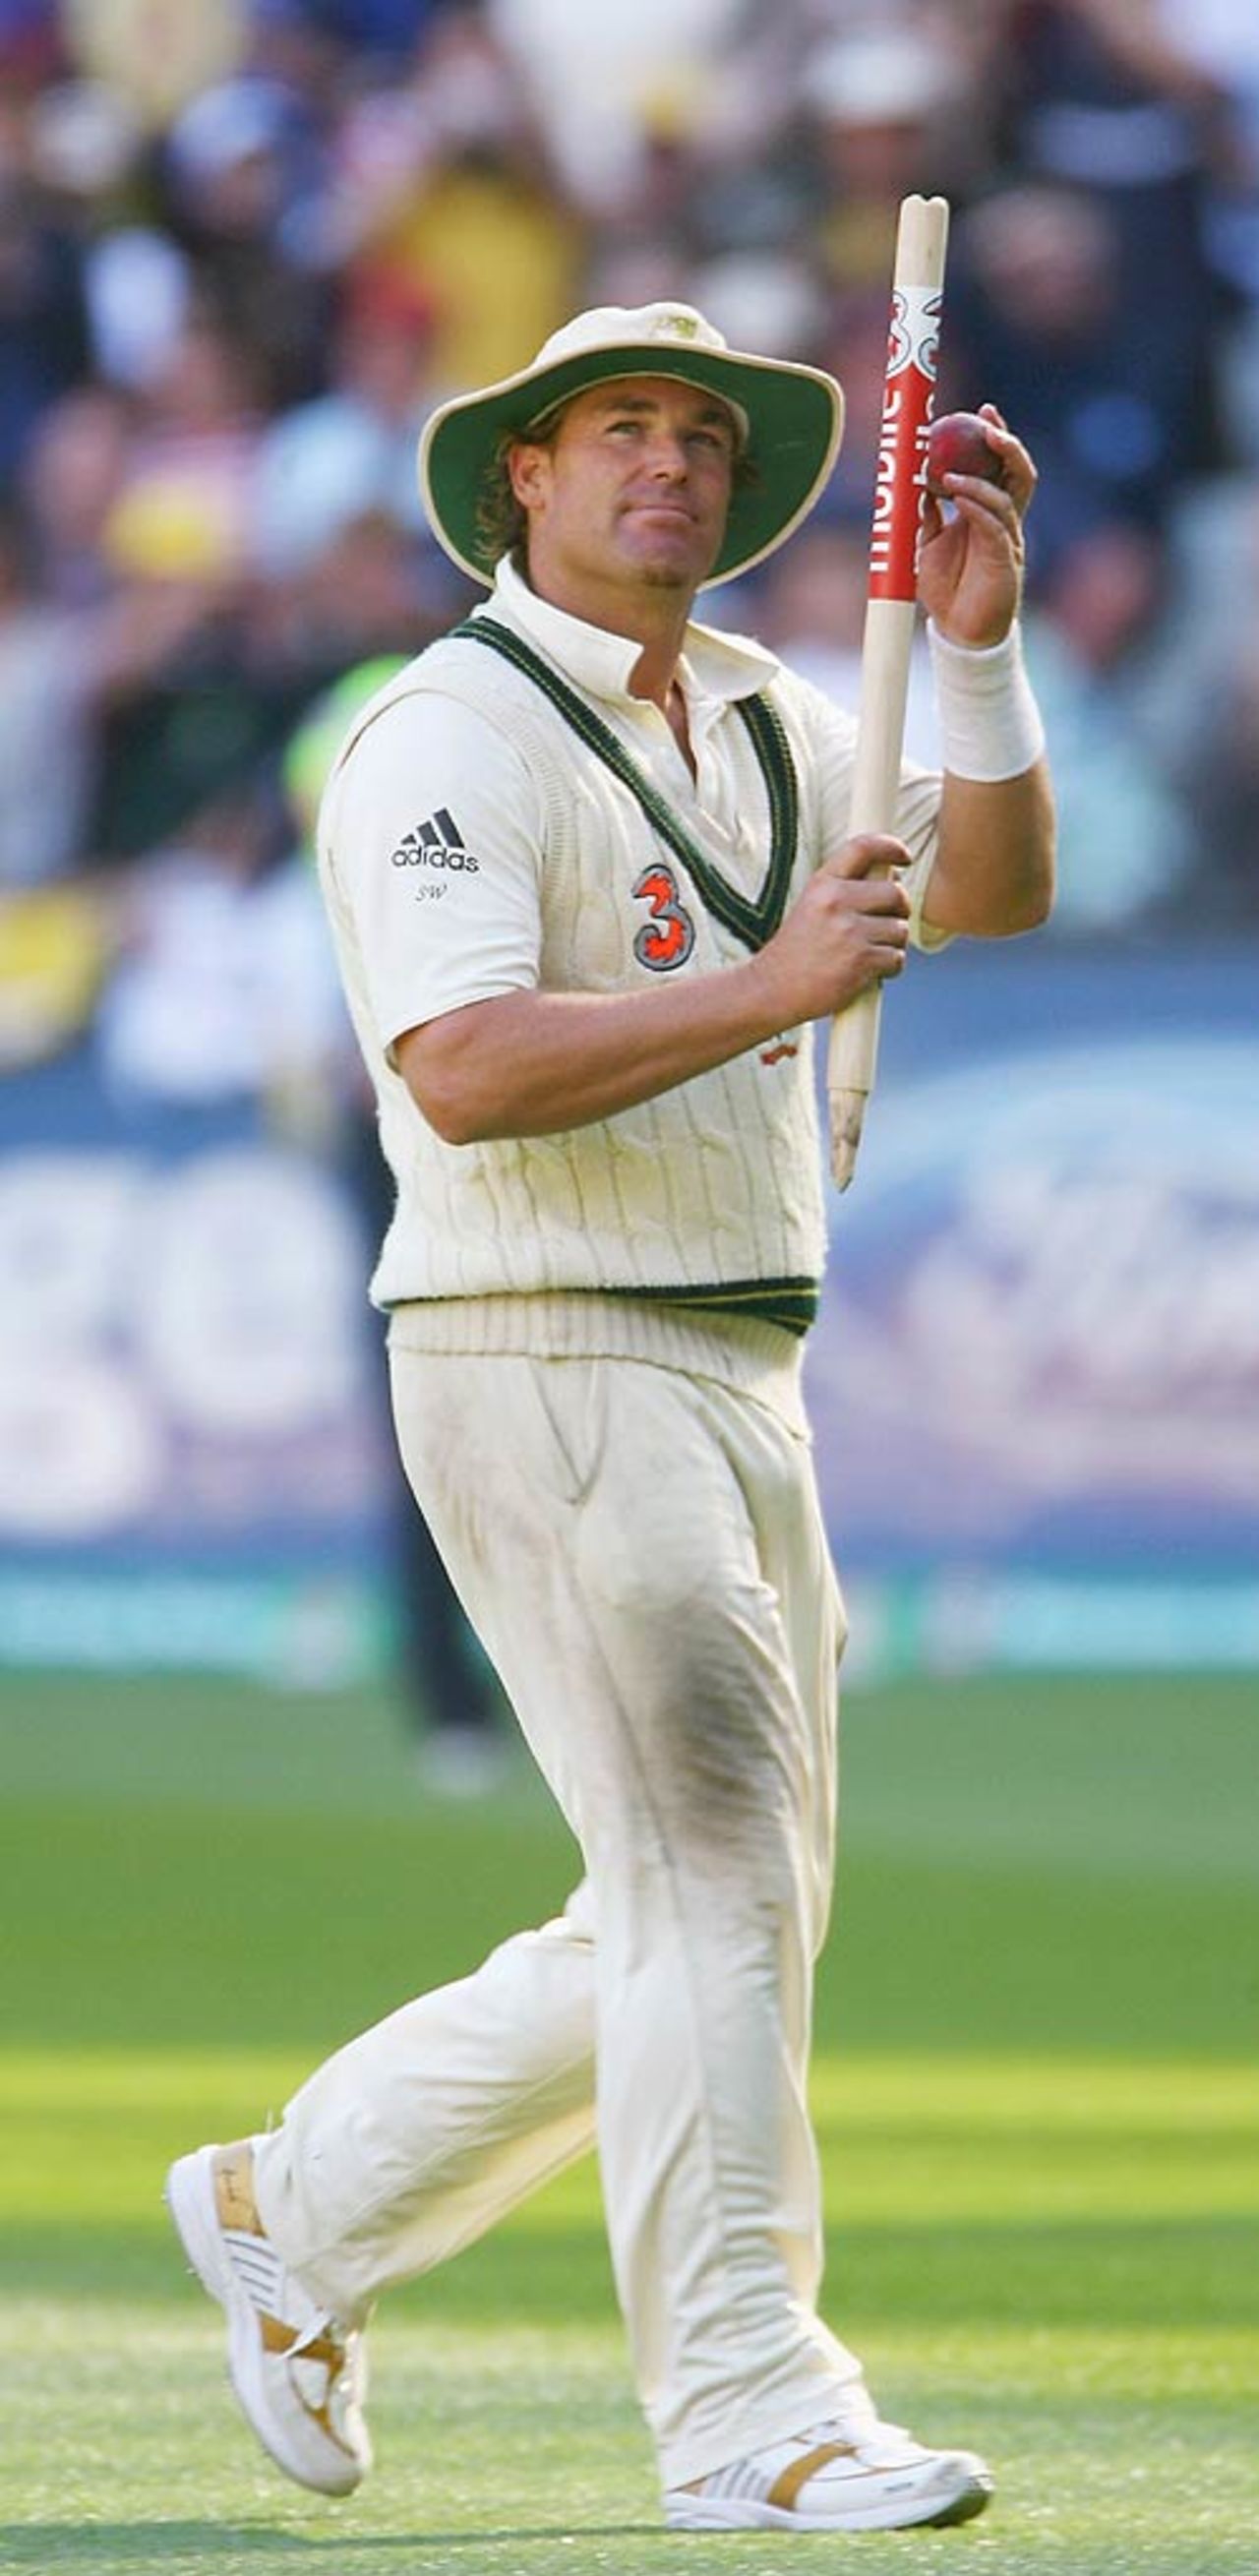 Shane Warne farewells his home ground the MCG after a Man-of-the-Match performance, Australia v England, 4th Test, Melbourne, December 28, 2006